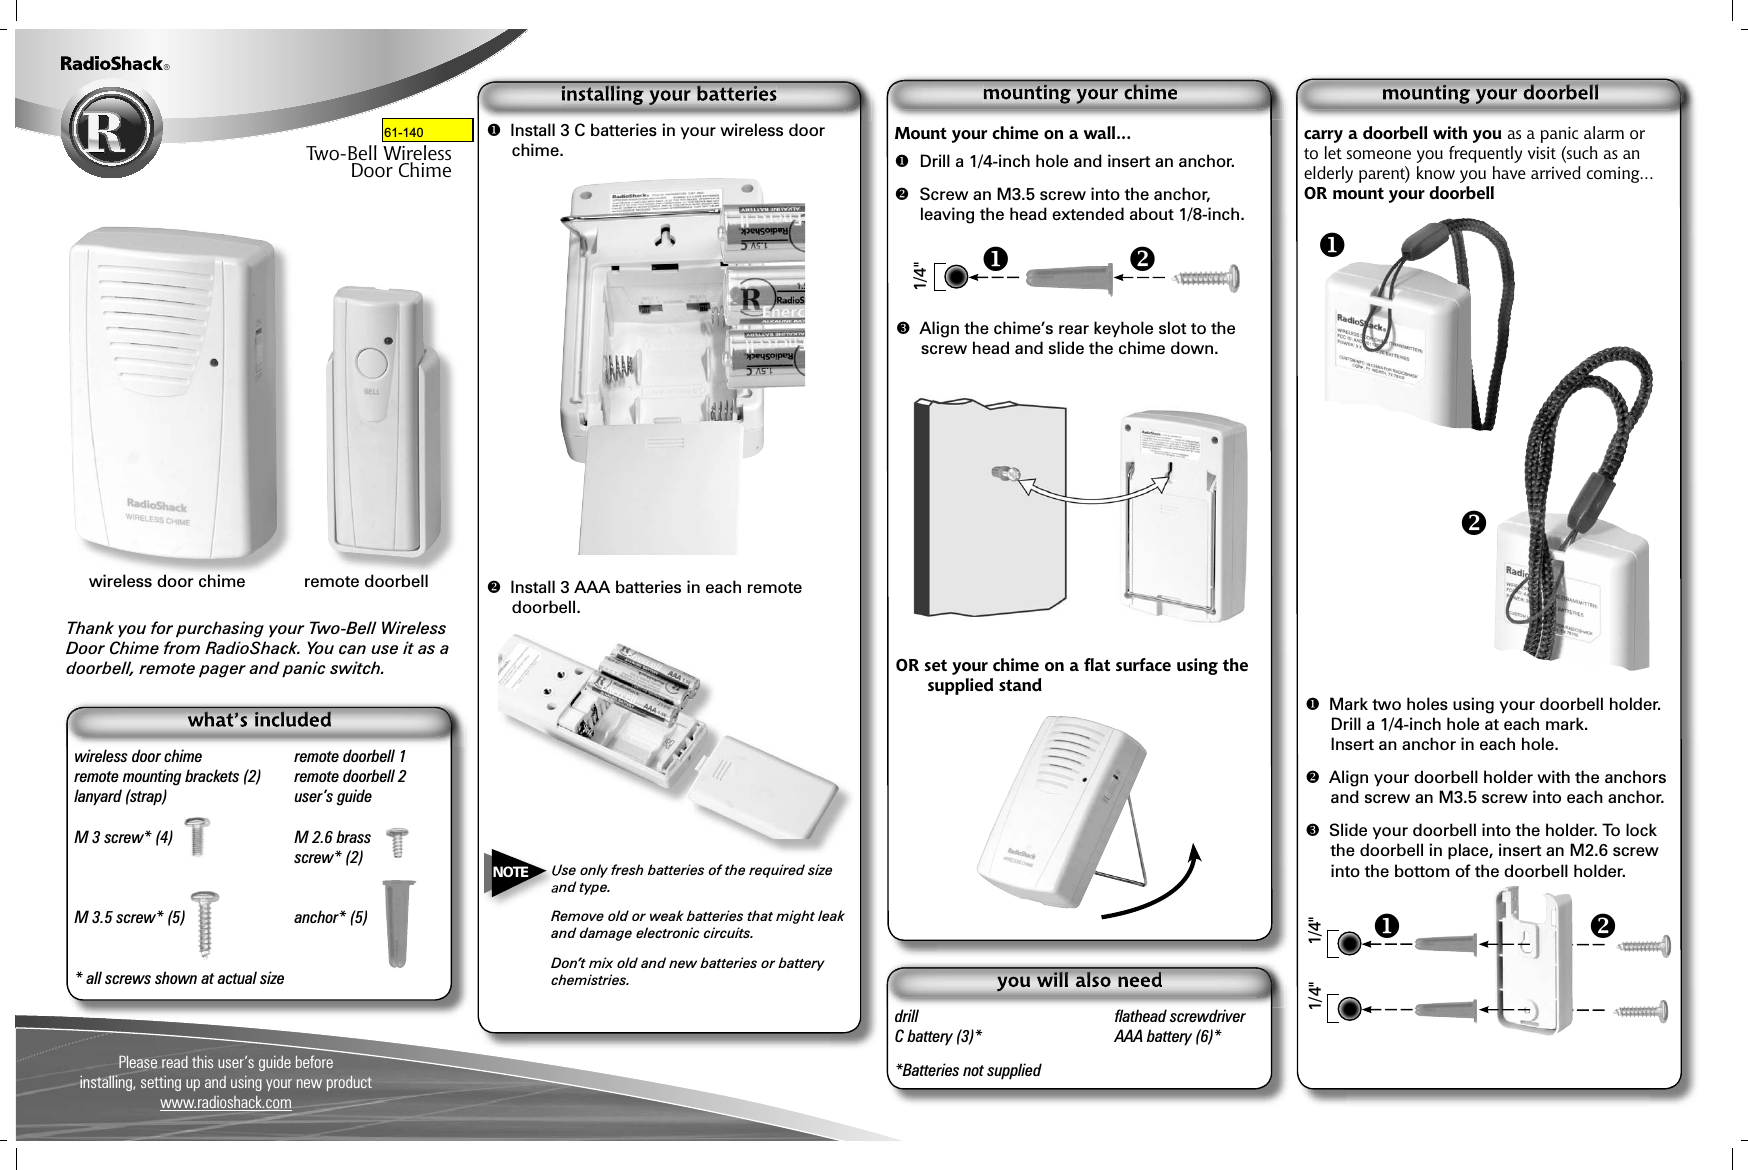 Please read this user’s guide beforeinstalling, setting up and using your new product www.radioshack.comThank you for purchasing your Two-Bell Wireless Door Chime from RadioShack. You can use it as a doorbell, remote pager and panic switch.61-2117Two-Bell WirelessDoor Chimewireless door chime  remote doorbell 1remote mounting brackets (2)  remote doorbell 2lanyard (strap)  user’s guideM 3 screw* (4)   M 2.6 brass  screw* (2)M 3.5 screw* (5)   anchor* (5)* all screws shown at actual sizeMount your chime on a wall...  Drill a 1/4-inch hole and insert an anchor. Screw an M3.5 screw into the anchor, leaving the head extended about 1/8-inch. Align the chime’s rear keyhole slot to the screw head and slide the chime down.OR set your chime on a ﬂ at surface using the supplied standdrill  ﬂ athead screwdriverC battery (3)*  AAA battery (6)**Batteries not supplied wireless door chime  remote doorbell1/4&quot;  Install 3 C batteries in your wireless door chime. Install 3 AAA batteries in each remote doorbell.Use only fresh batteries of the required size and type.Remove old or weak batteries that might leak and damage electronic circuits.Don’t mix old and new batteries or battery chemistries.NOTEcarry a doorbell with you as a panic alarm or to let someone you frequently visit (such as an elderly parent) know you have arrived coming...OR mount your doorbell  Mark two holes using your doorbell holder.Drill a 1/4-inch hole at each mark.Insert an anchor in each hole. Align your doorbell holder with the anchors and screw an M3.5 screw into each anchor. Slide your doorbell into the holder. To lock the doorbell in place, insert an M2.6 screw into the bottom of the doorbell holder.1/4&quot;1/4&quot;61-140